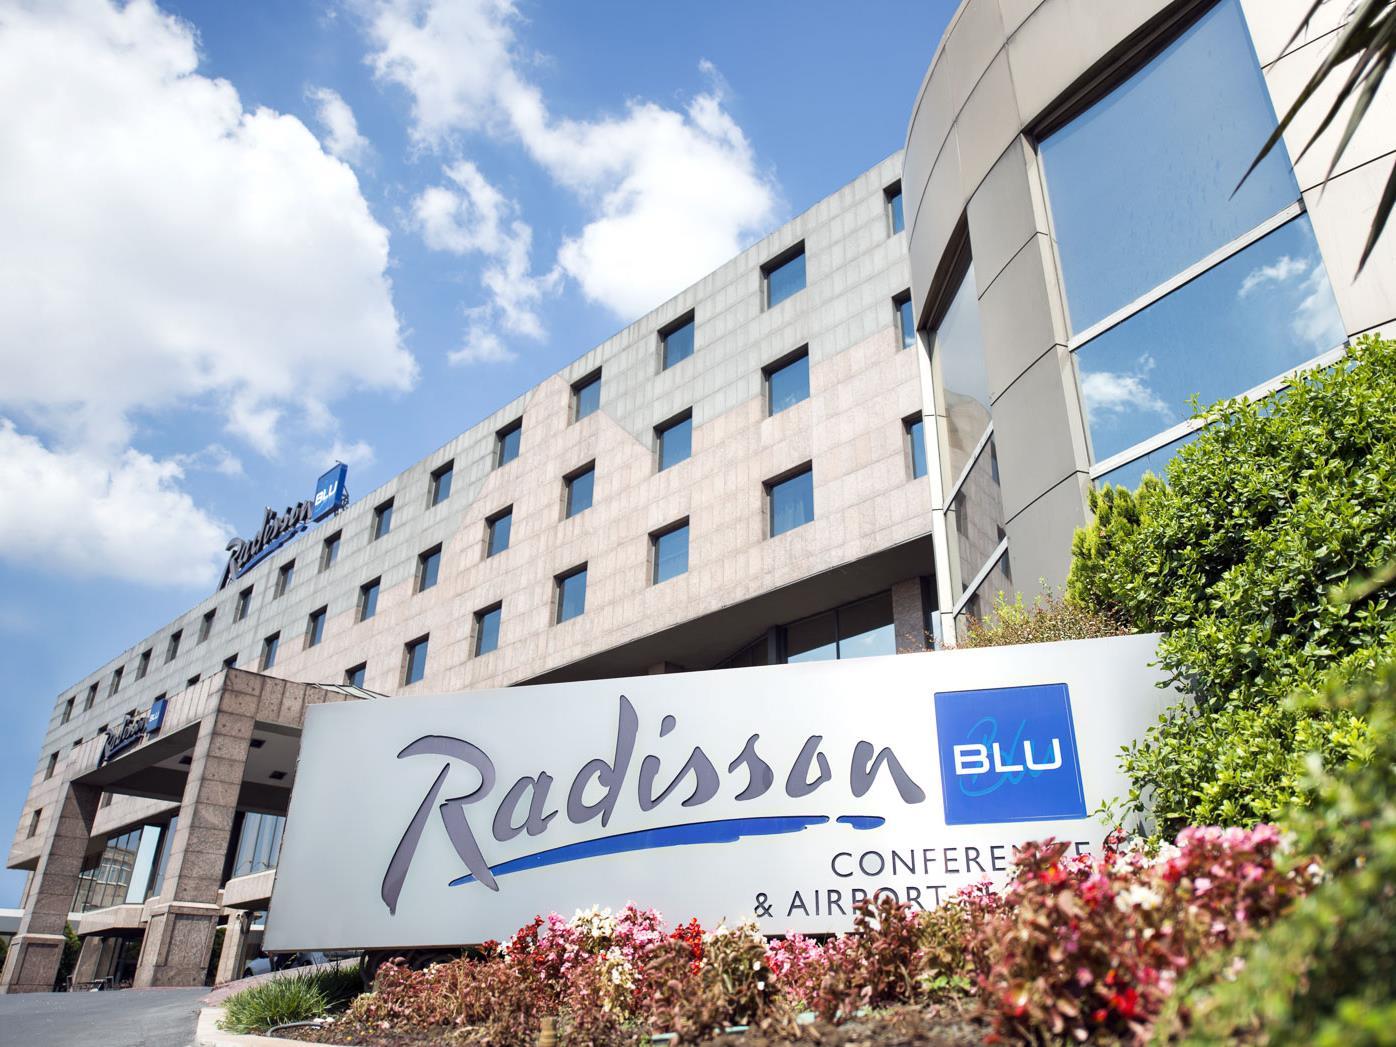 Radisson Blu Conference and Airport Hotel Istanbul FAQ 2017, What facilities are there in Radisson Blu Conference and Airport Hotel Istanbul 2017, What Languages Spoken are Supported in Radisson Blu Conference and Airport Hotel Istanbul 2017, Which payment cards are accepted in Radisson Blu Conference and Airport Hotel Istanbul , Istanbul Radisson Blu Conference and Airport Hotel room facilities and services Q&A 2017, Istanbul Radisson Blu Conference and Airport Hotel online booking services 2017, Istanbul Radisson Blu Conference and Airport Hotel address 2017, Istanbul Radisson Blu Conference and Airport Hotel telephone number 2017,Istanbul Radisson Blu Conference and Airport Hotel map 2017, Istanbul Radisson Blu Conference and Airport Hotel traffic guide 2017, how to go Istanbul Radisson Blu Conference and Airport Hotel, Istanbul Radisson Blu Conference and Airport Hotel booking online 2017, Istanbul Radisson Blu Conference and Airport Hotel room types 2017.